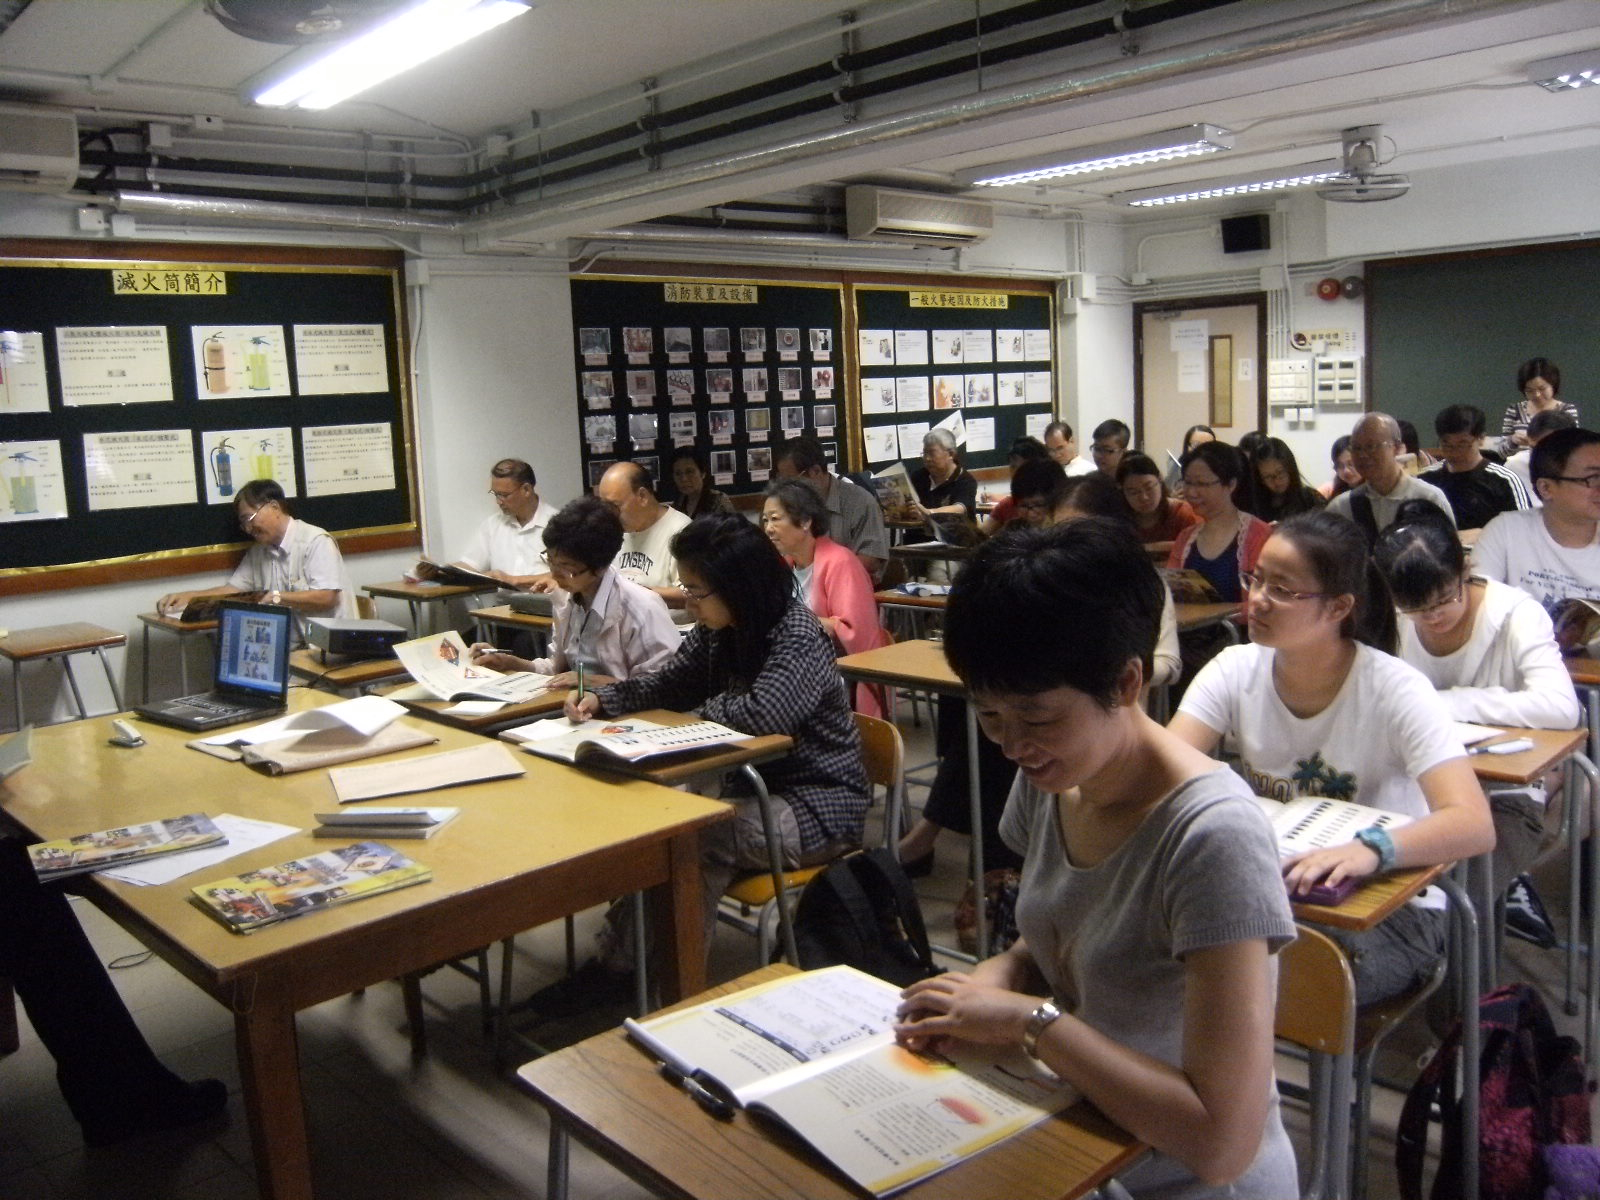 Kowloon City District Fire Safety Ambassadors Training Course (14 October 2012)